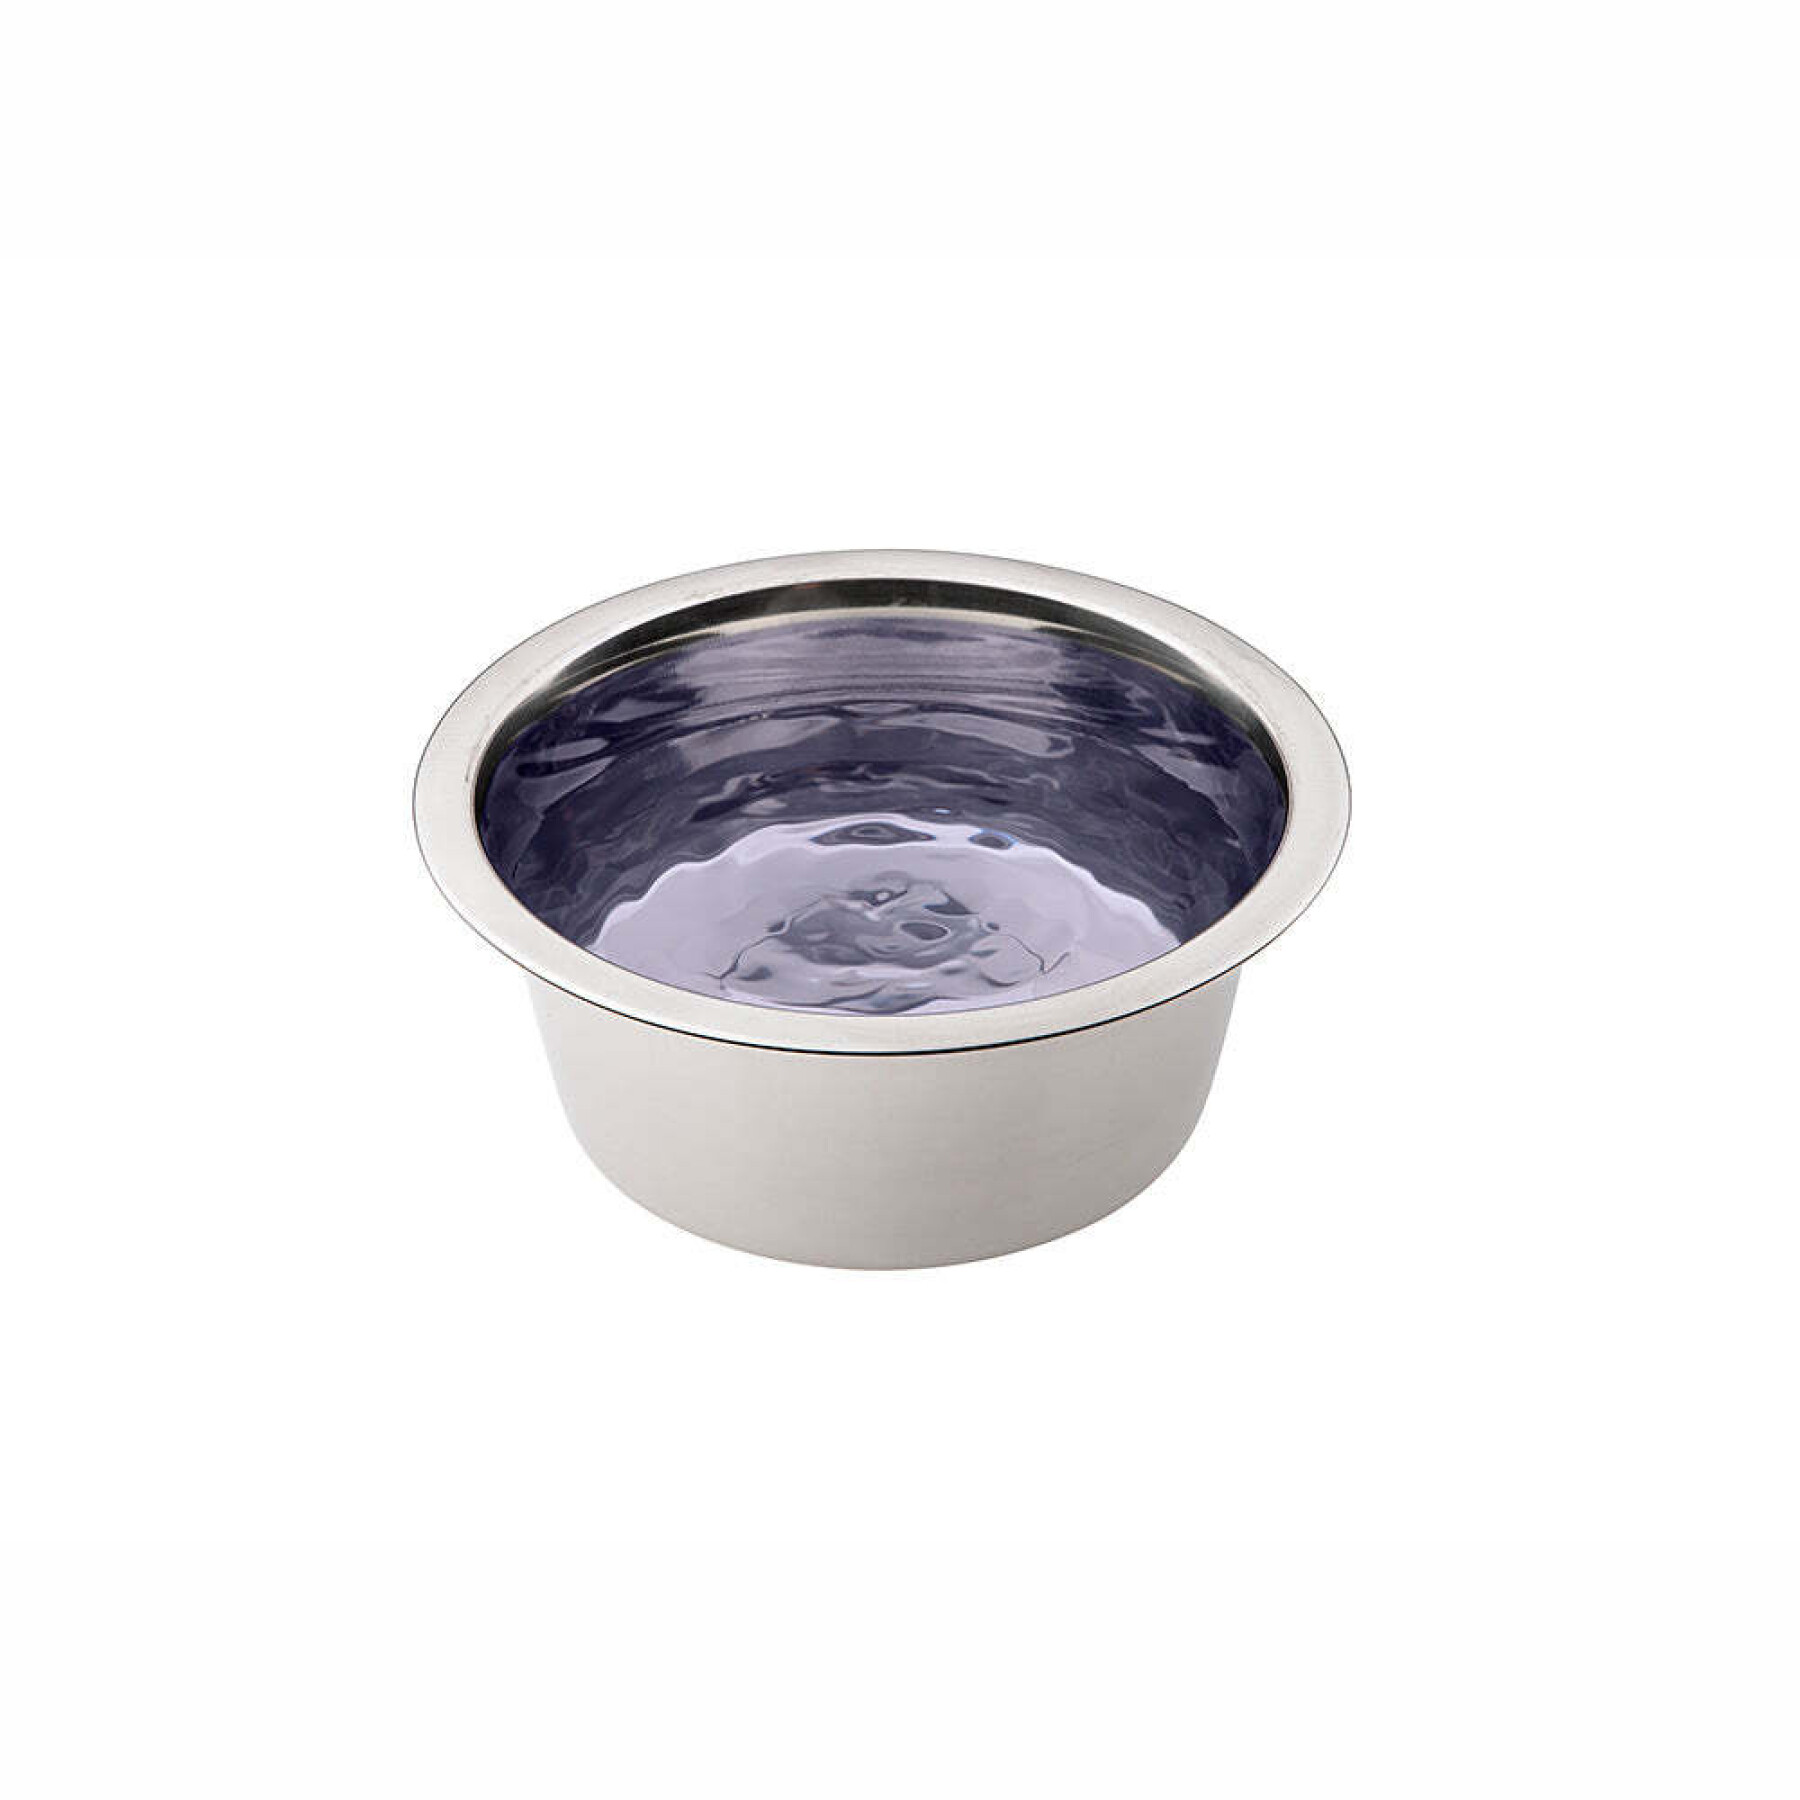 Dog and cat bowls Ferplast Orion 60